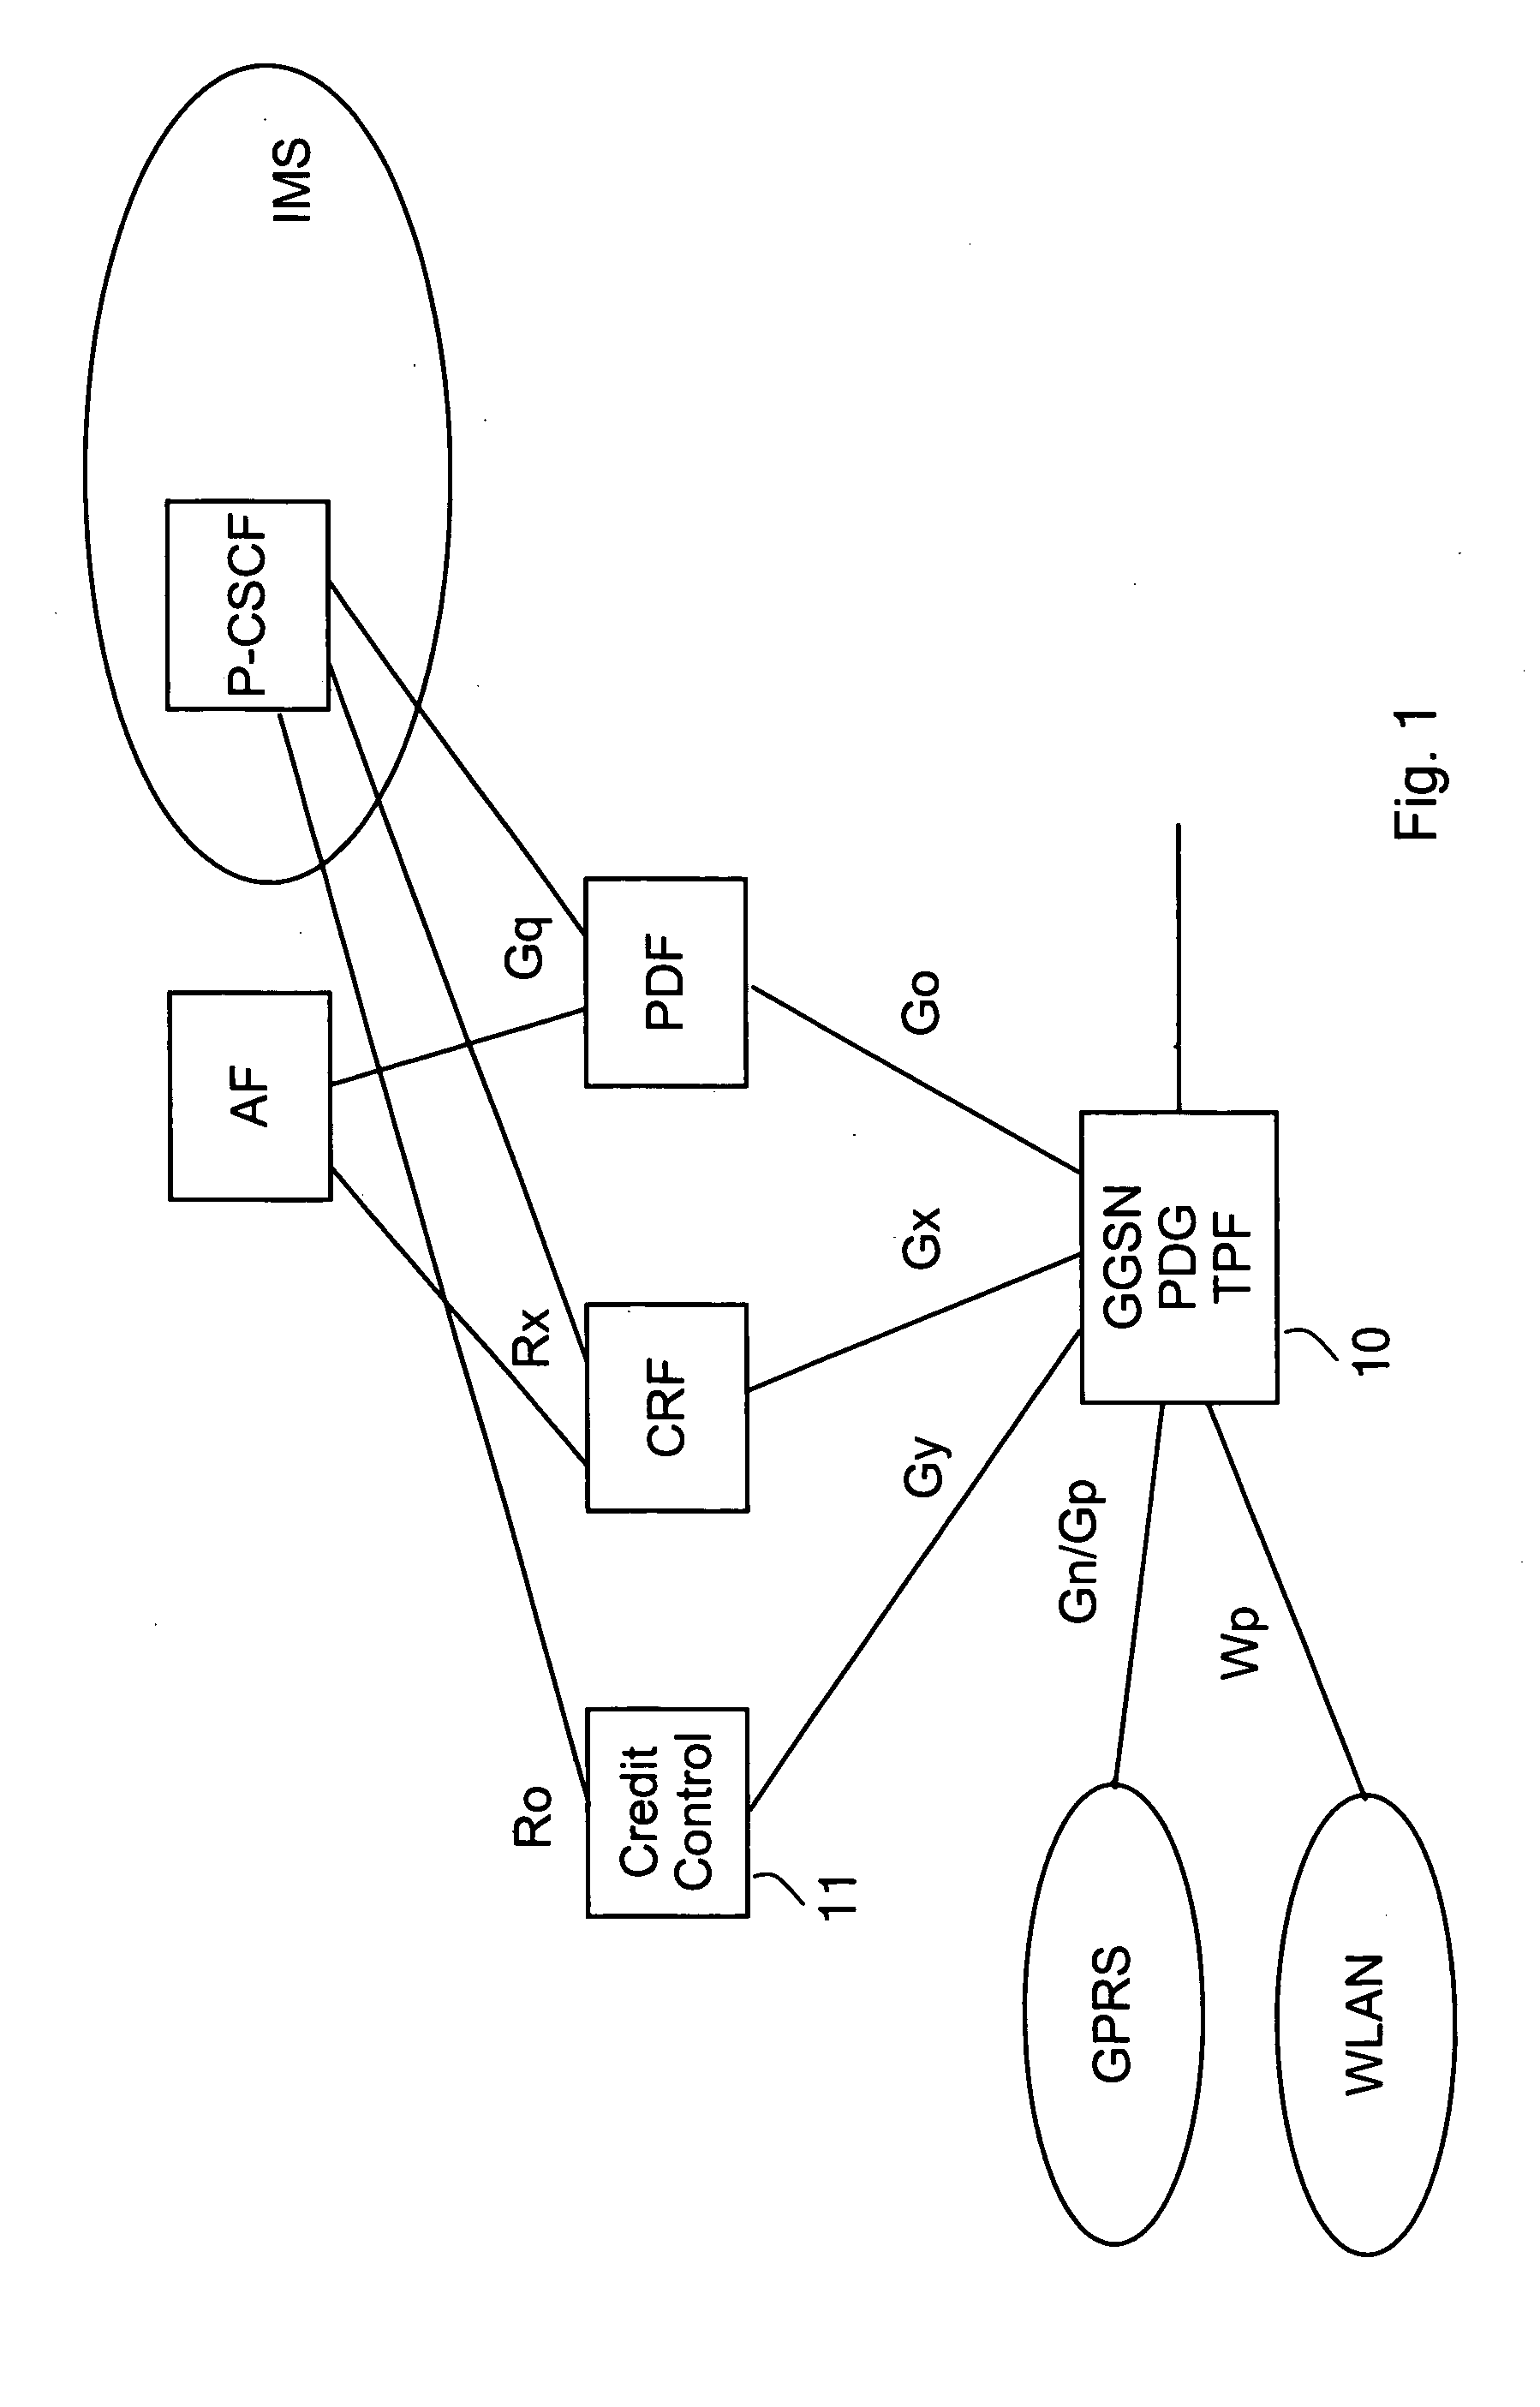 Dynamic service information for the access network